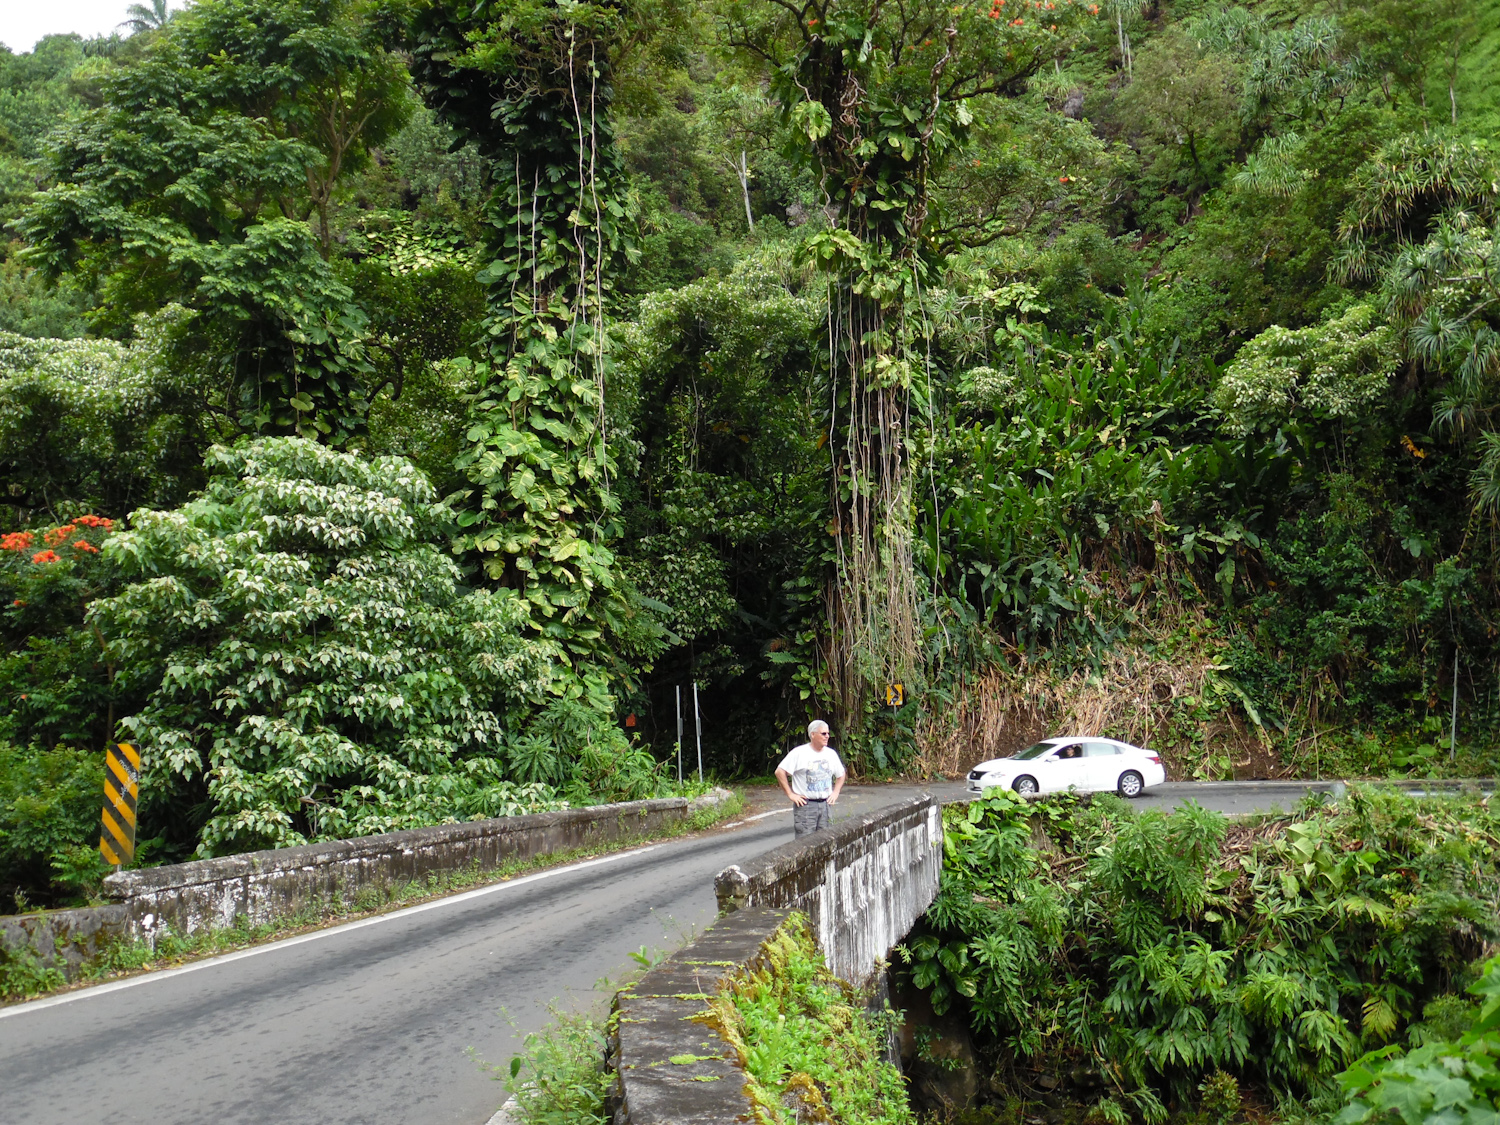 1 of the 54 bridges on the road to Hana